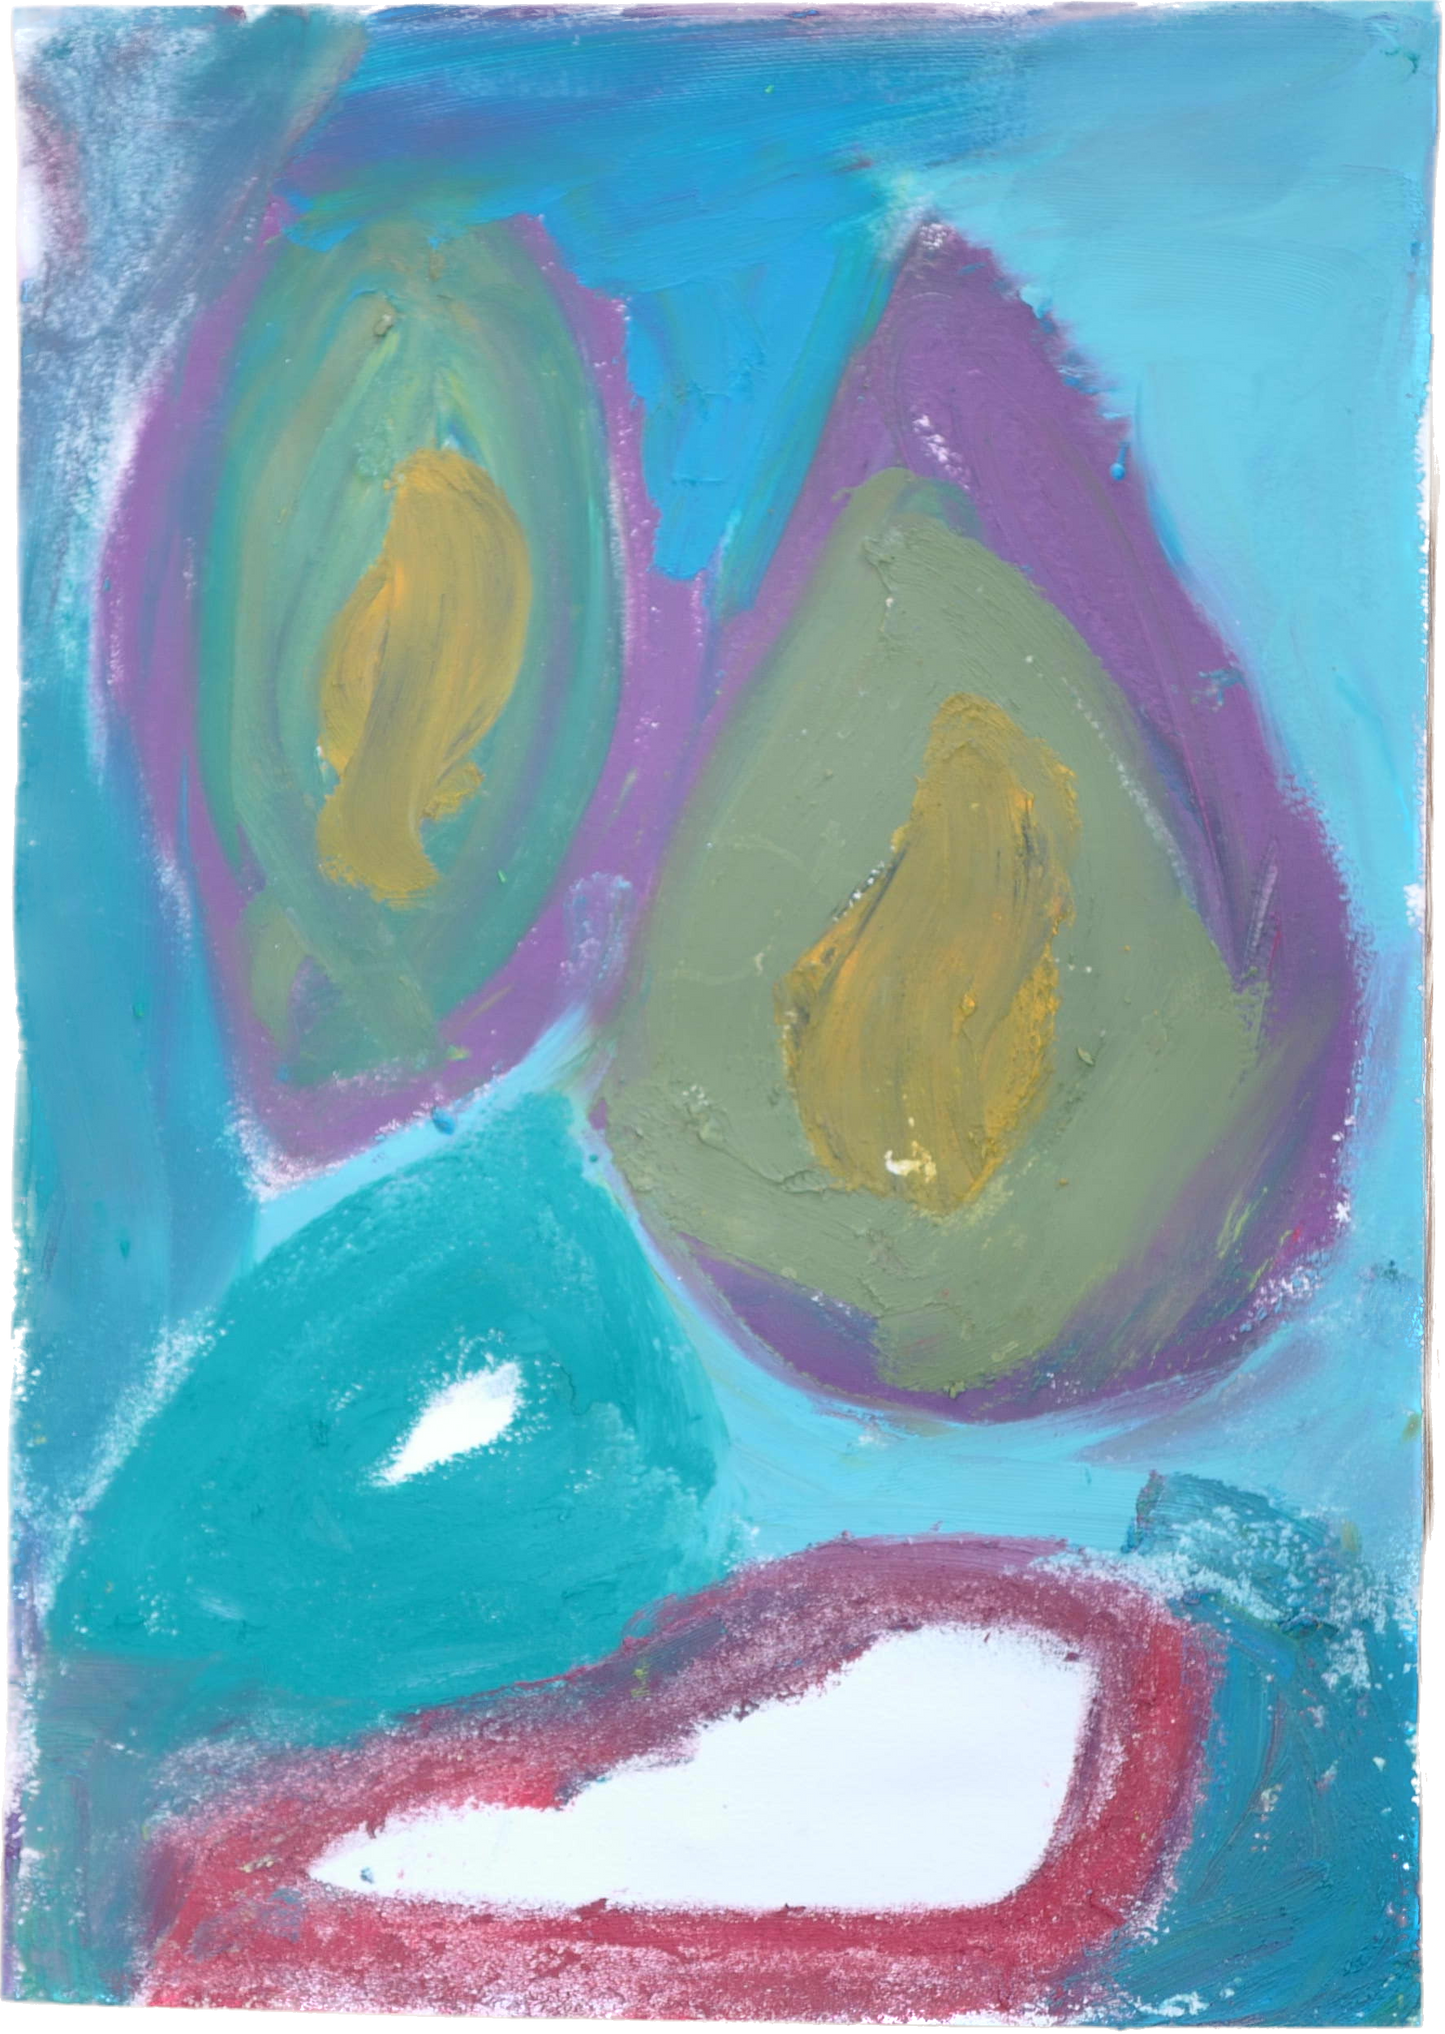 "Lenfantvivant verdant abstract art" "Abstract oil pastel with green ovals" "Golden-centered forms in abstract" "Sauna Fusion art with harmonic colors" "Lenfantvivant No. 146 art piece"